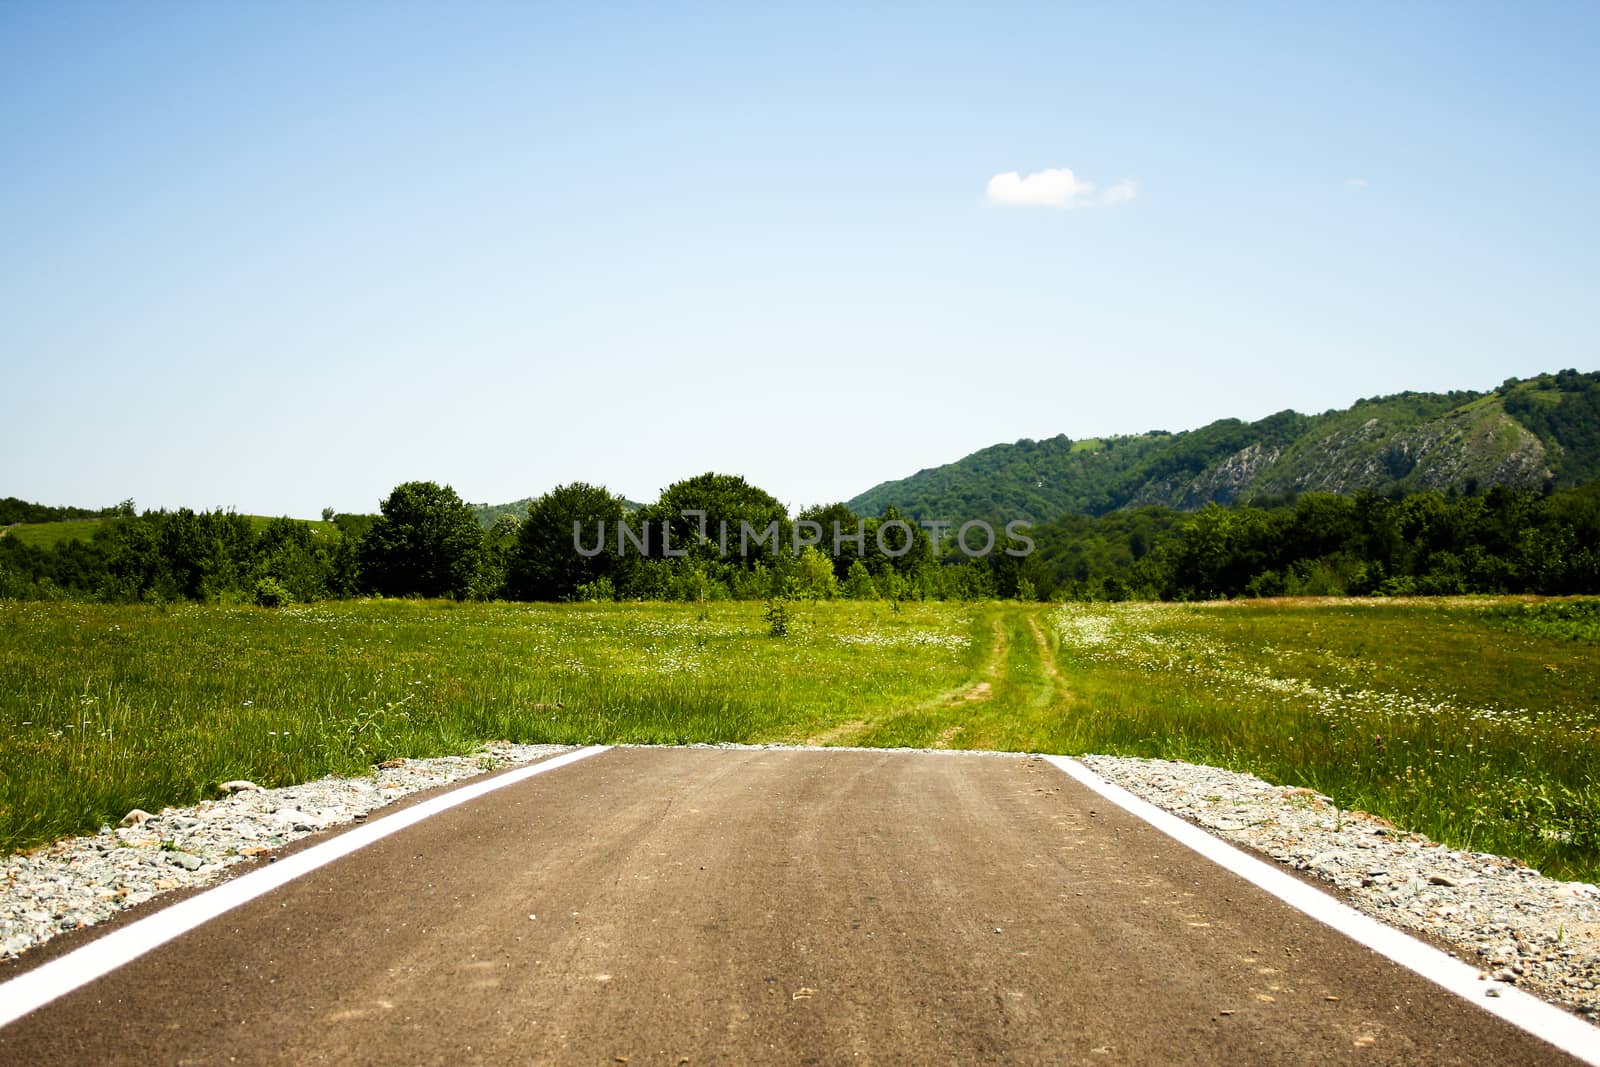 Paved road ending abruptly in the middle of a green plain with some trails ahead